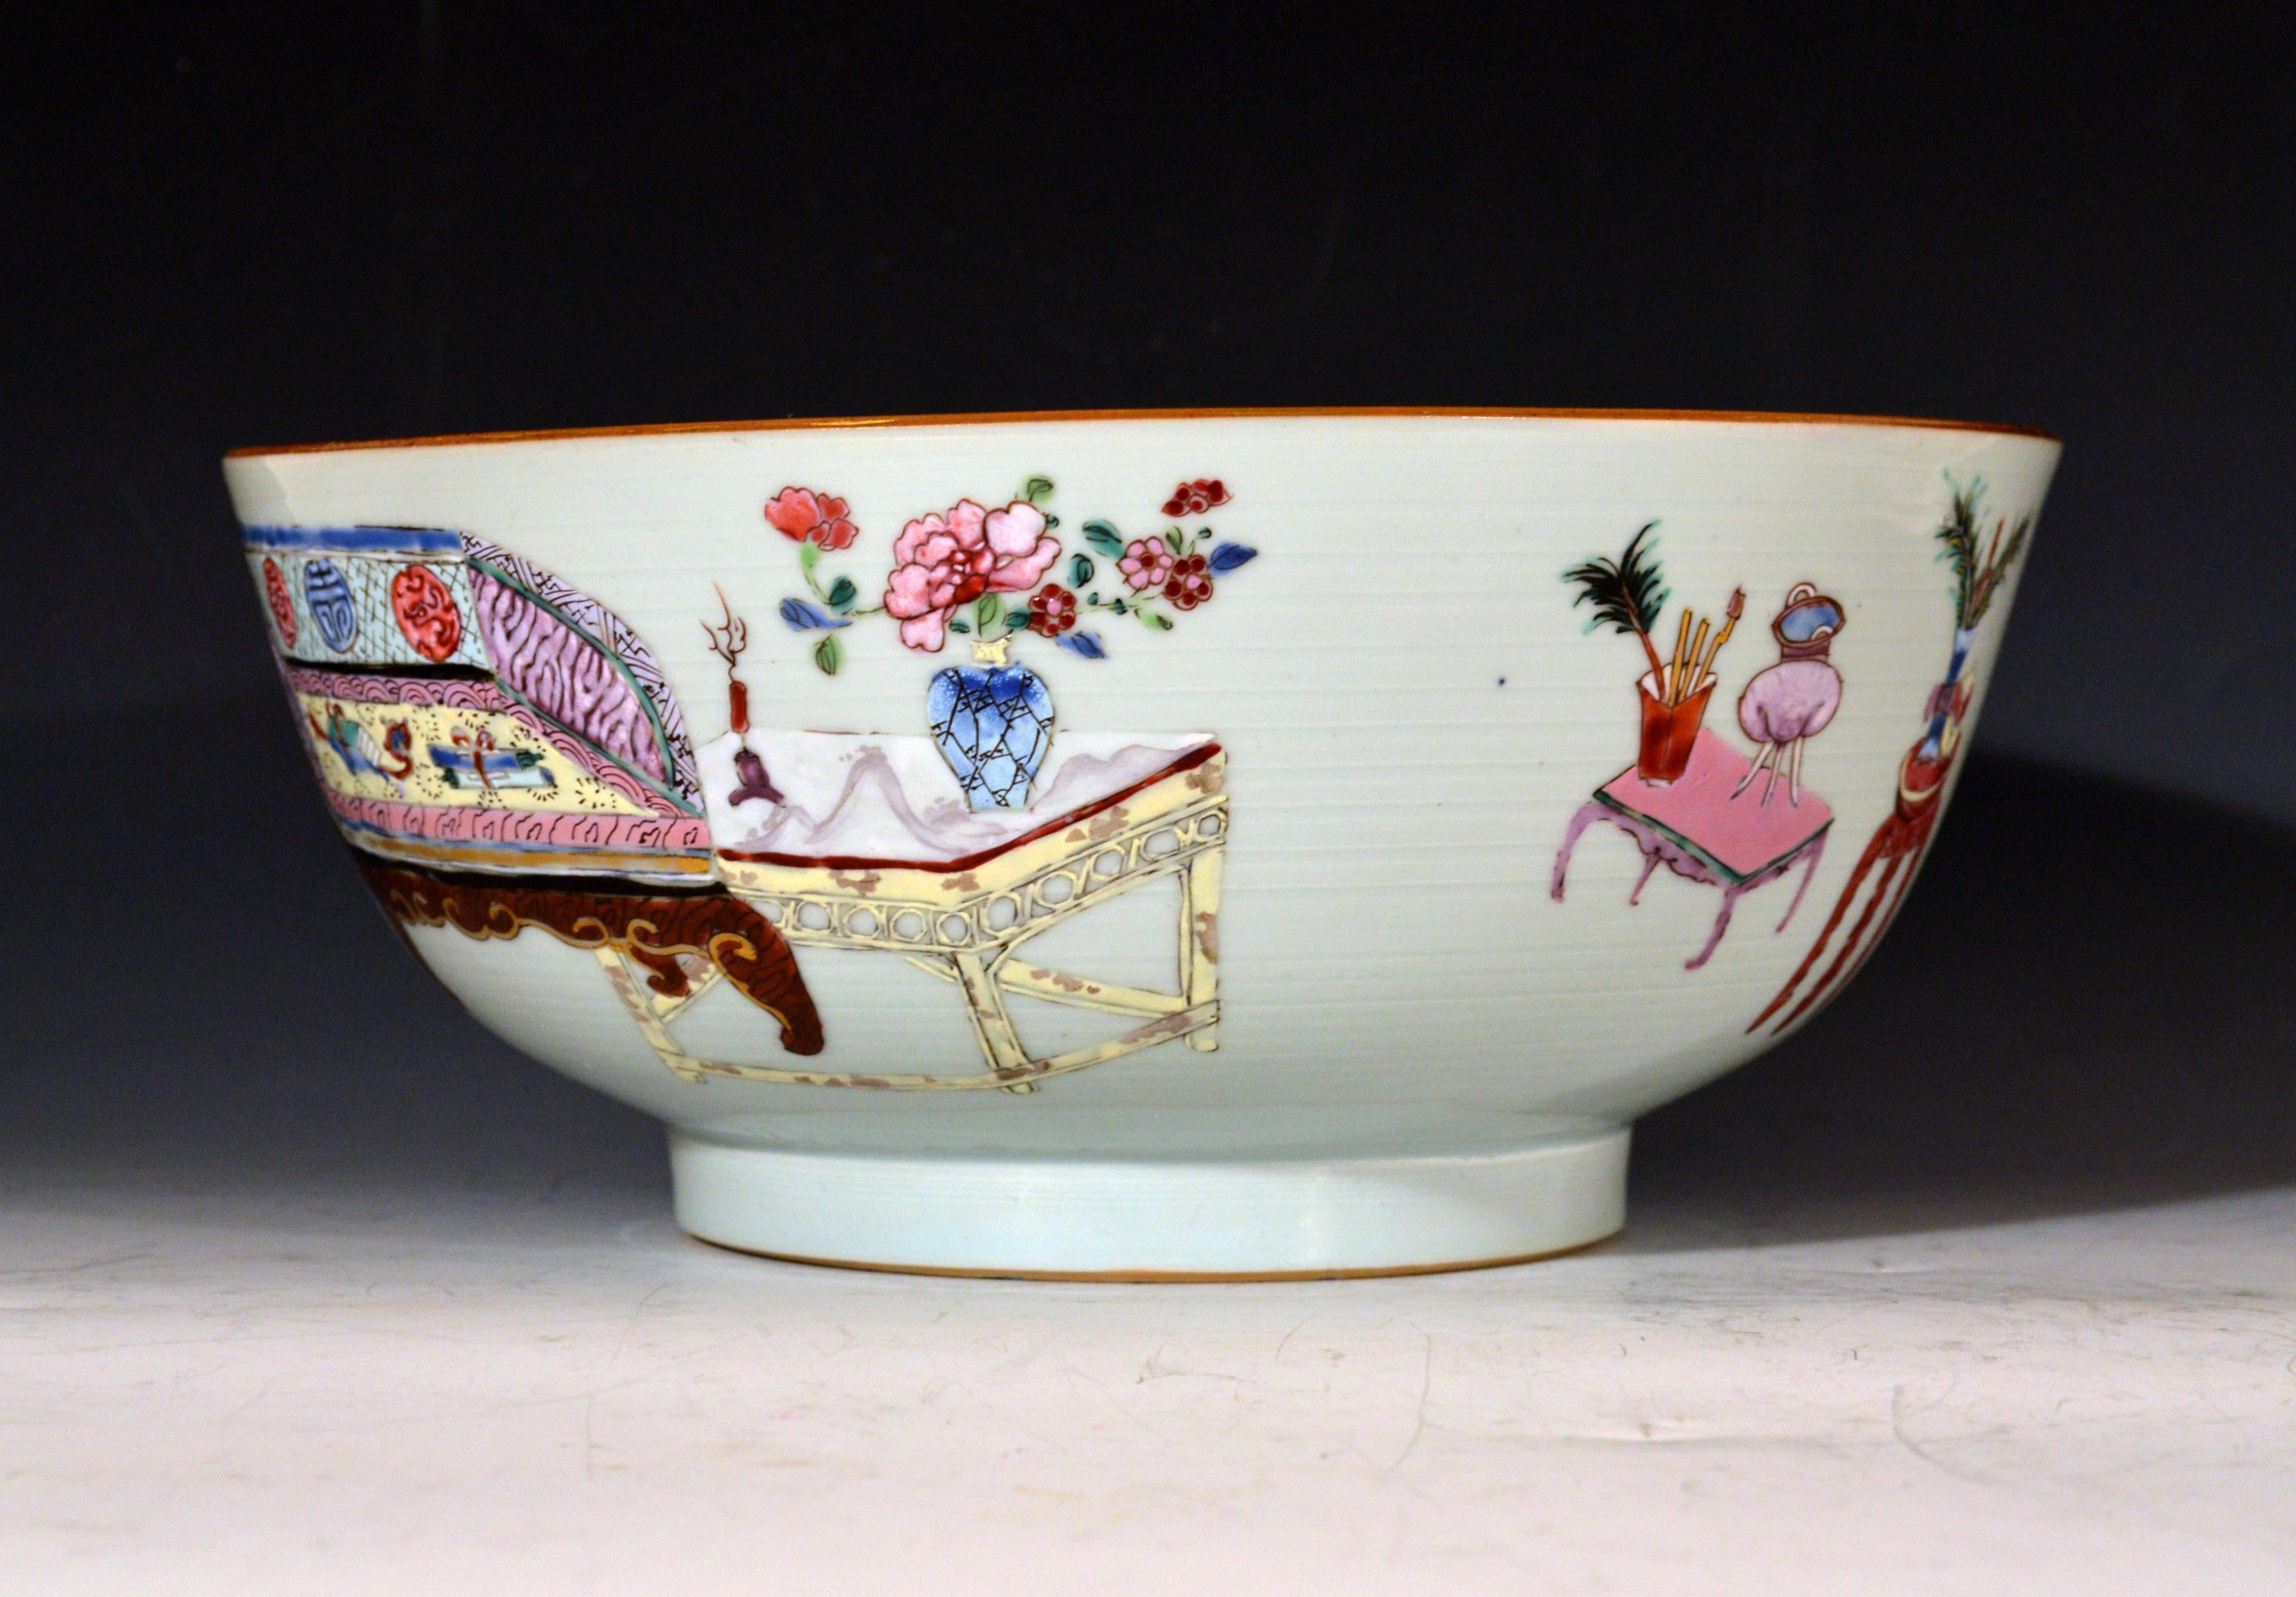 18th Century Chinese Export Porcelain Bowl with Chinese Domestic Furniture For Sale 4